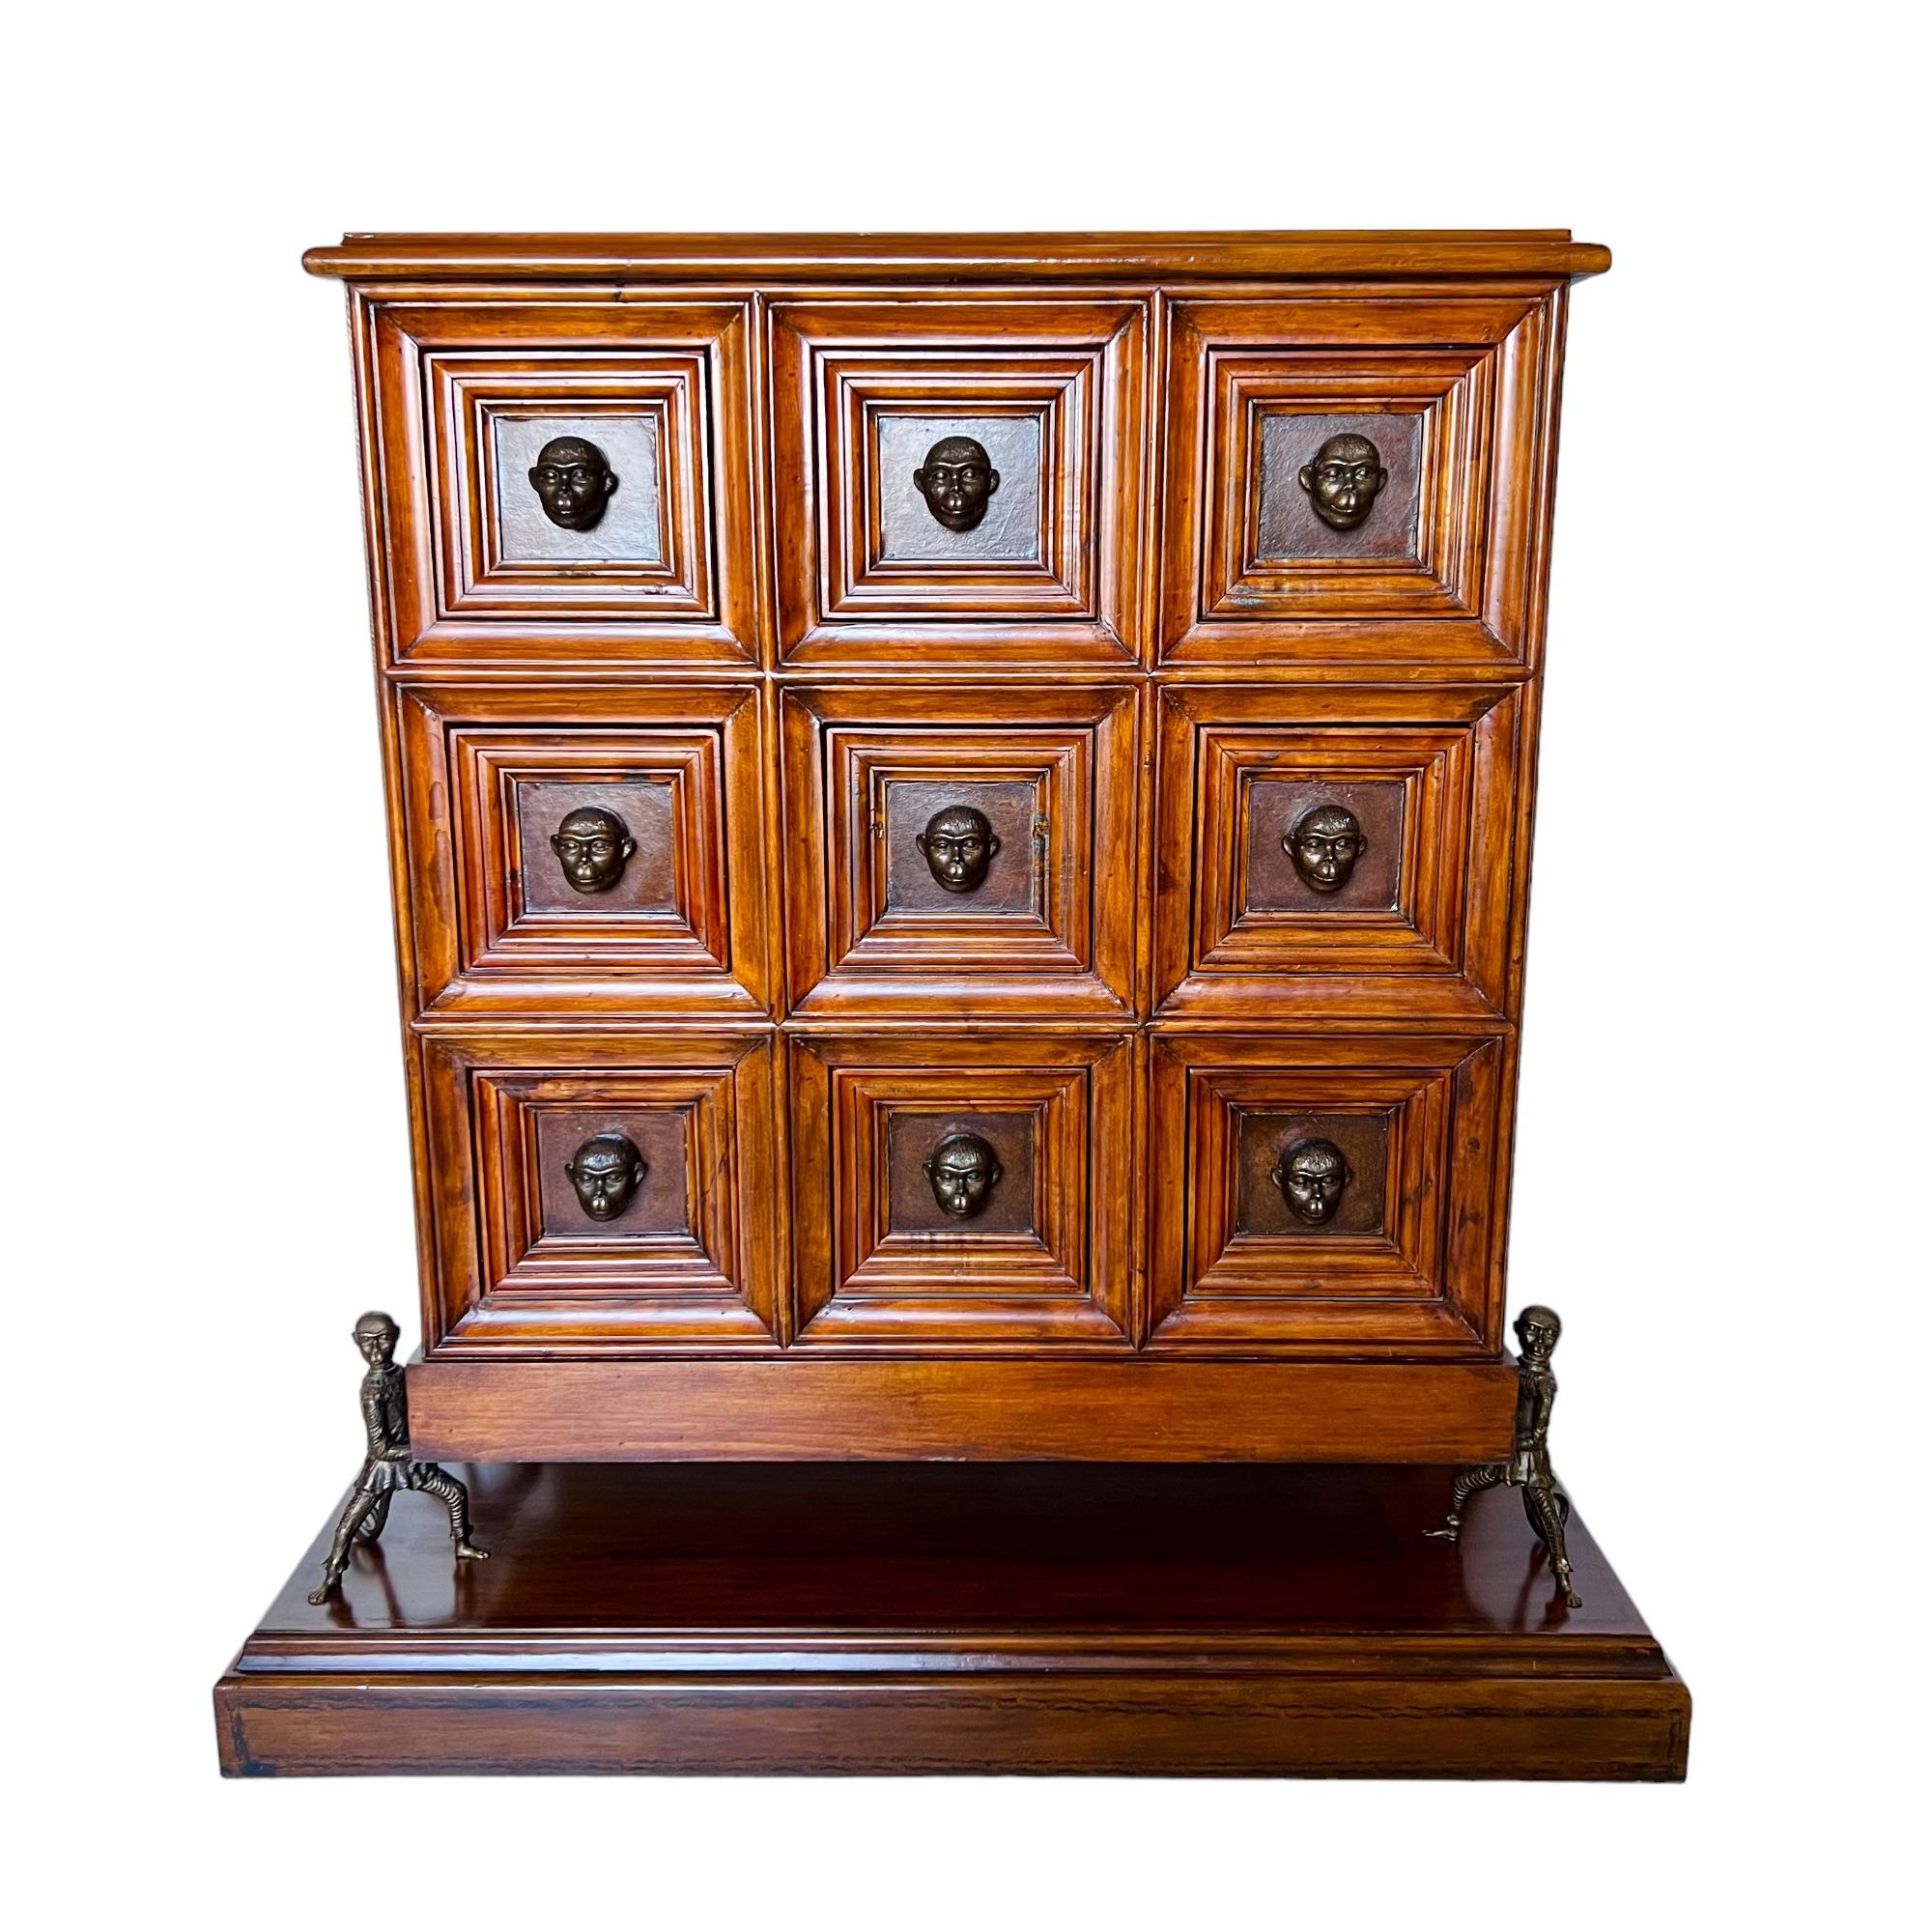 This late 20th century leather paneled brass mounted apothecary Humorous Chest in the manner of Theodore Alexander is styled after an original 19th century Italian design. It features nine framed drawers with resin monkey head pulls and a patinated